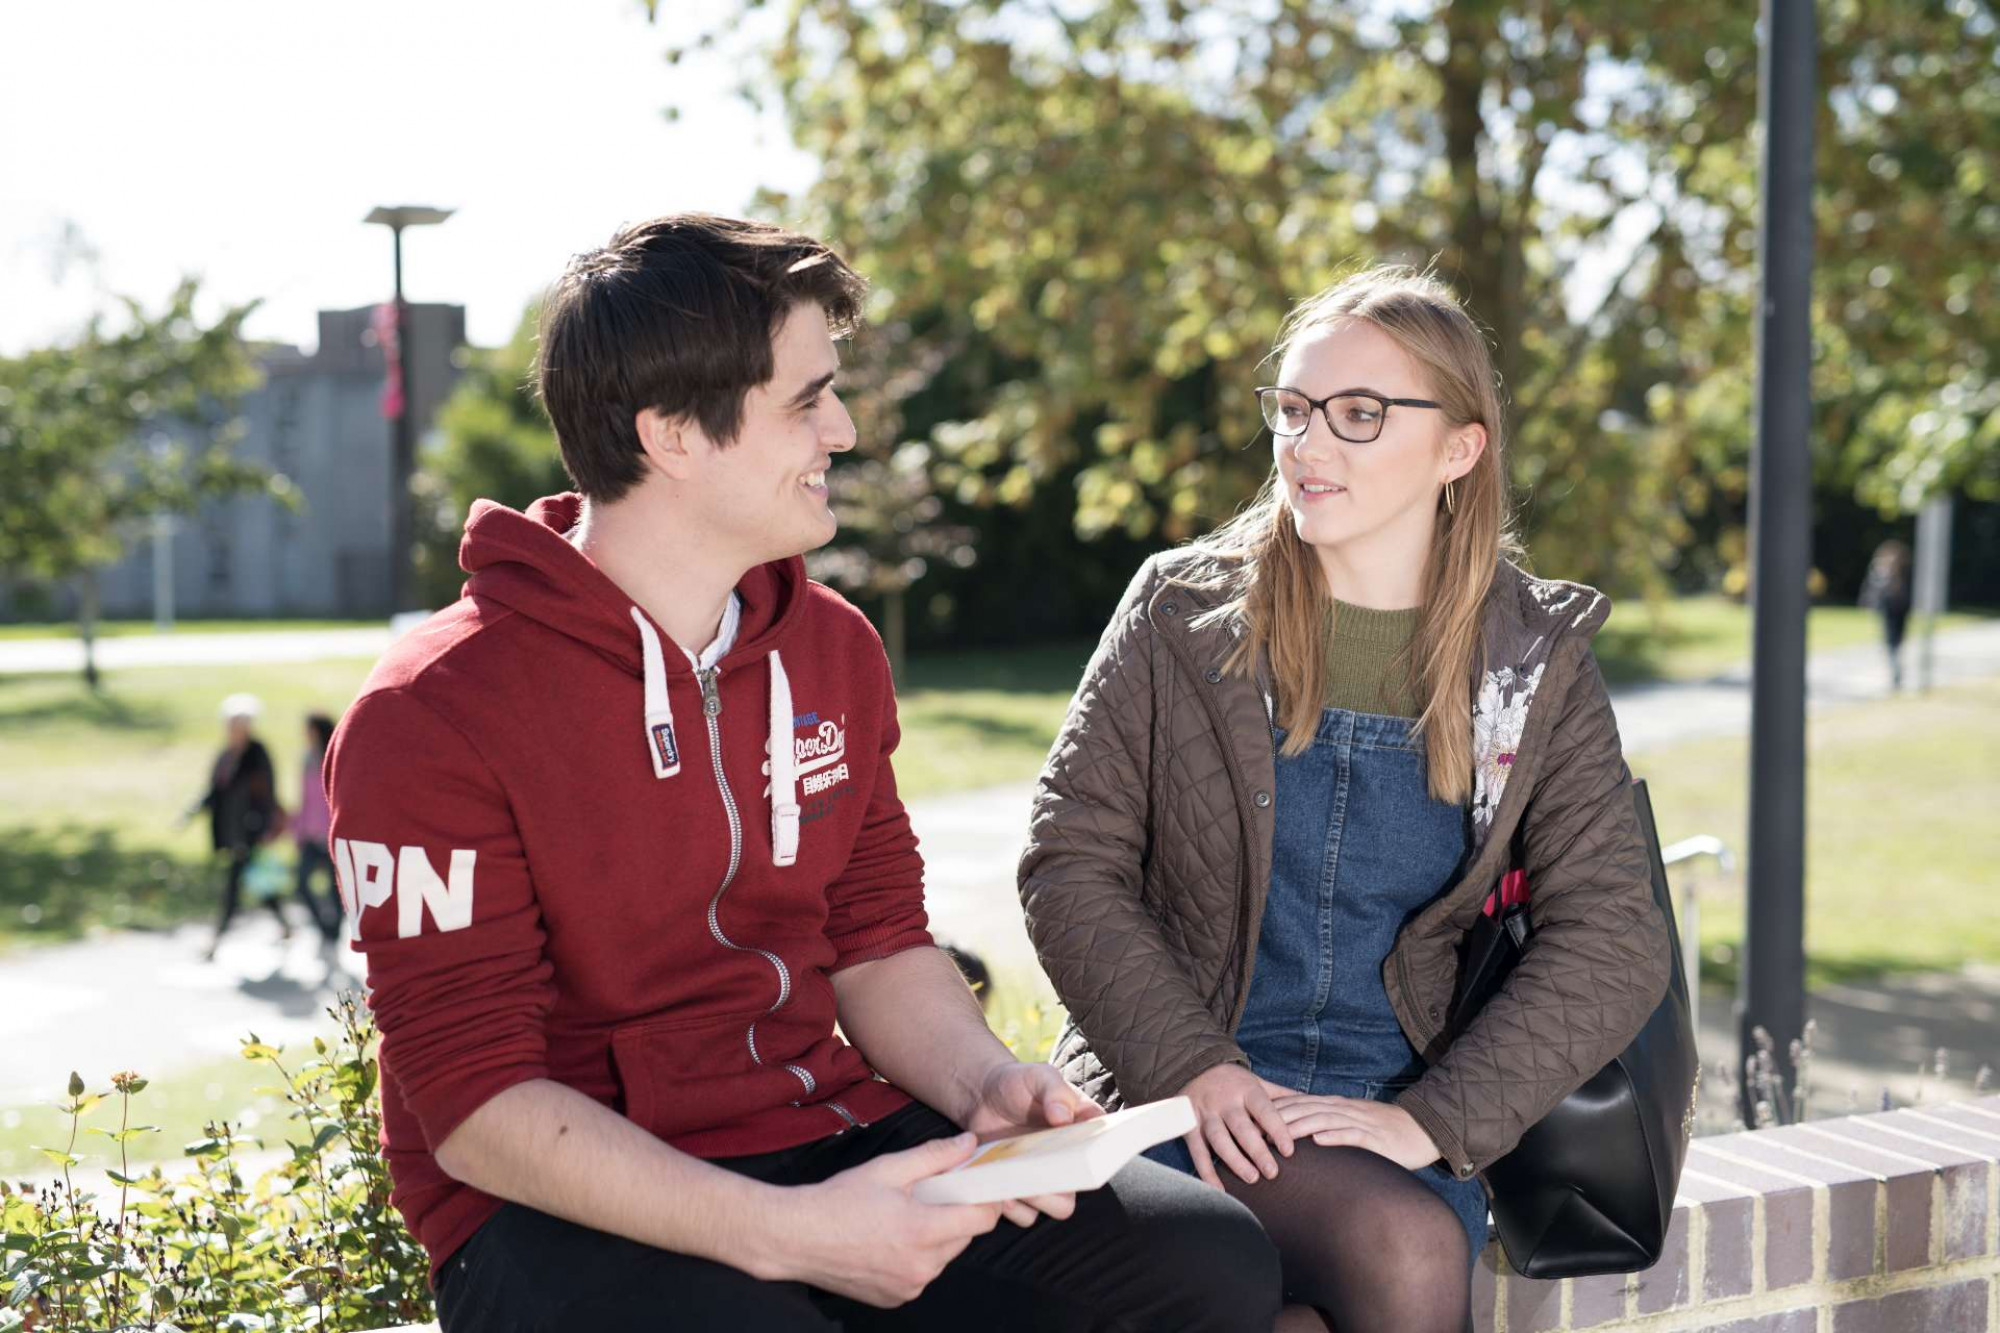 Male and female University of Kent students enjoying a chat outdoors on a sunny day, campus in the background.